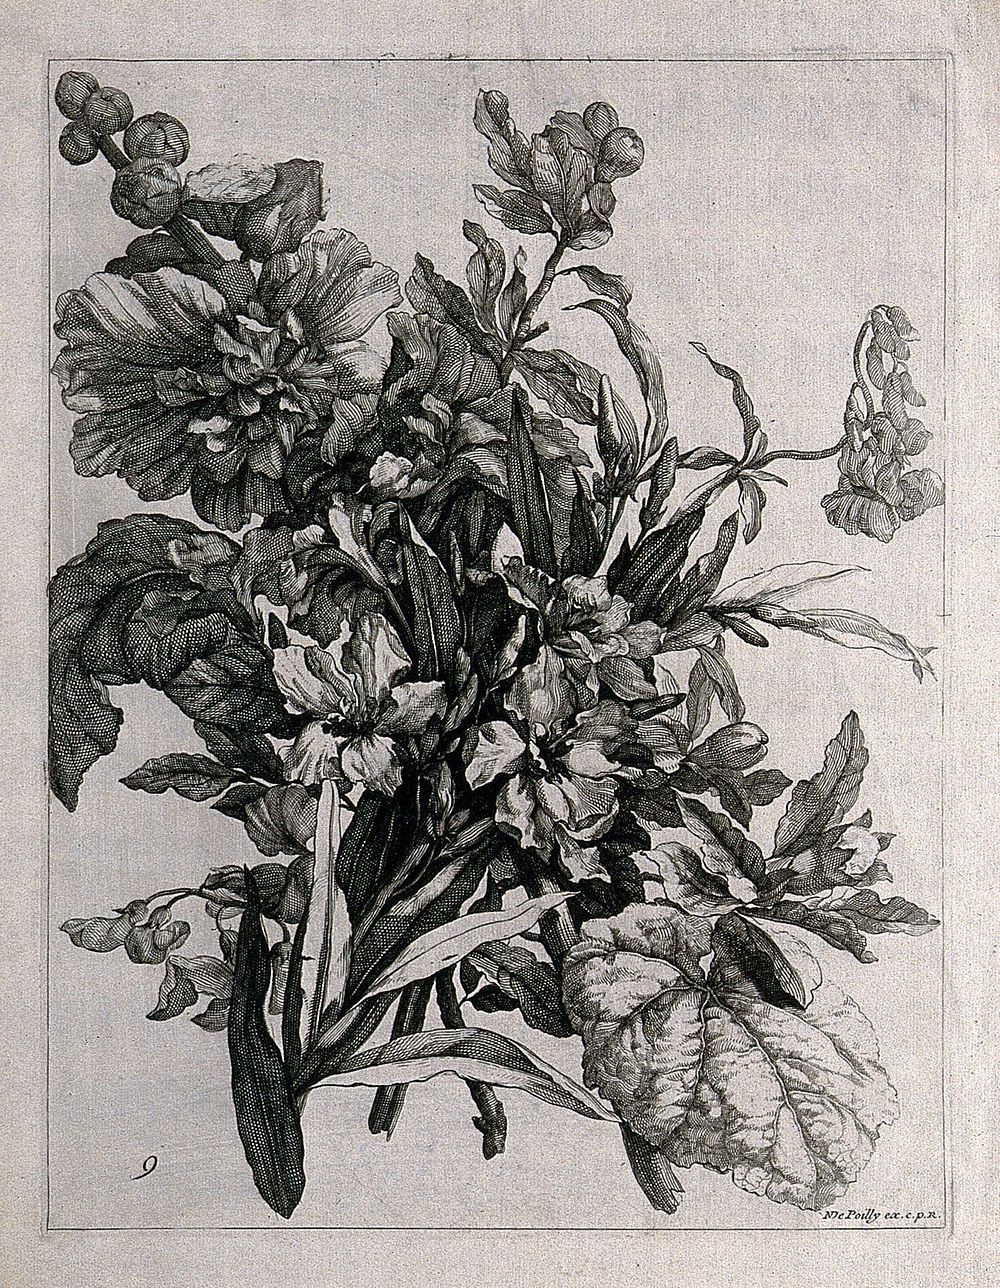 Floral bouquet. Engraving by N. de Poilly, c.1660, after himself.